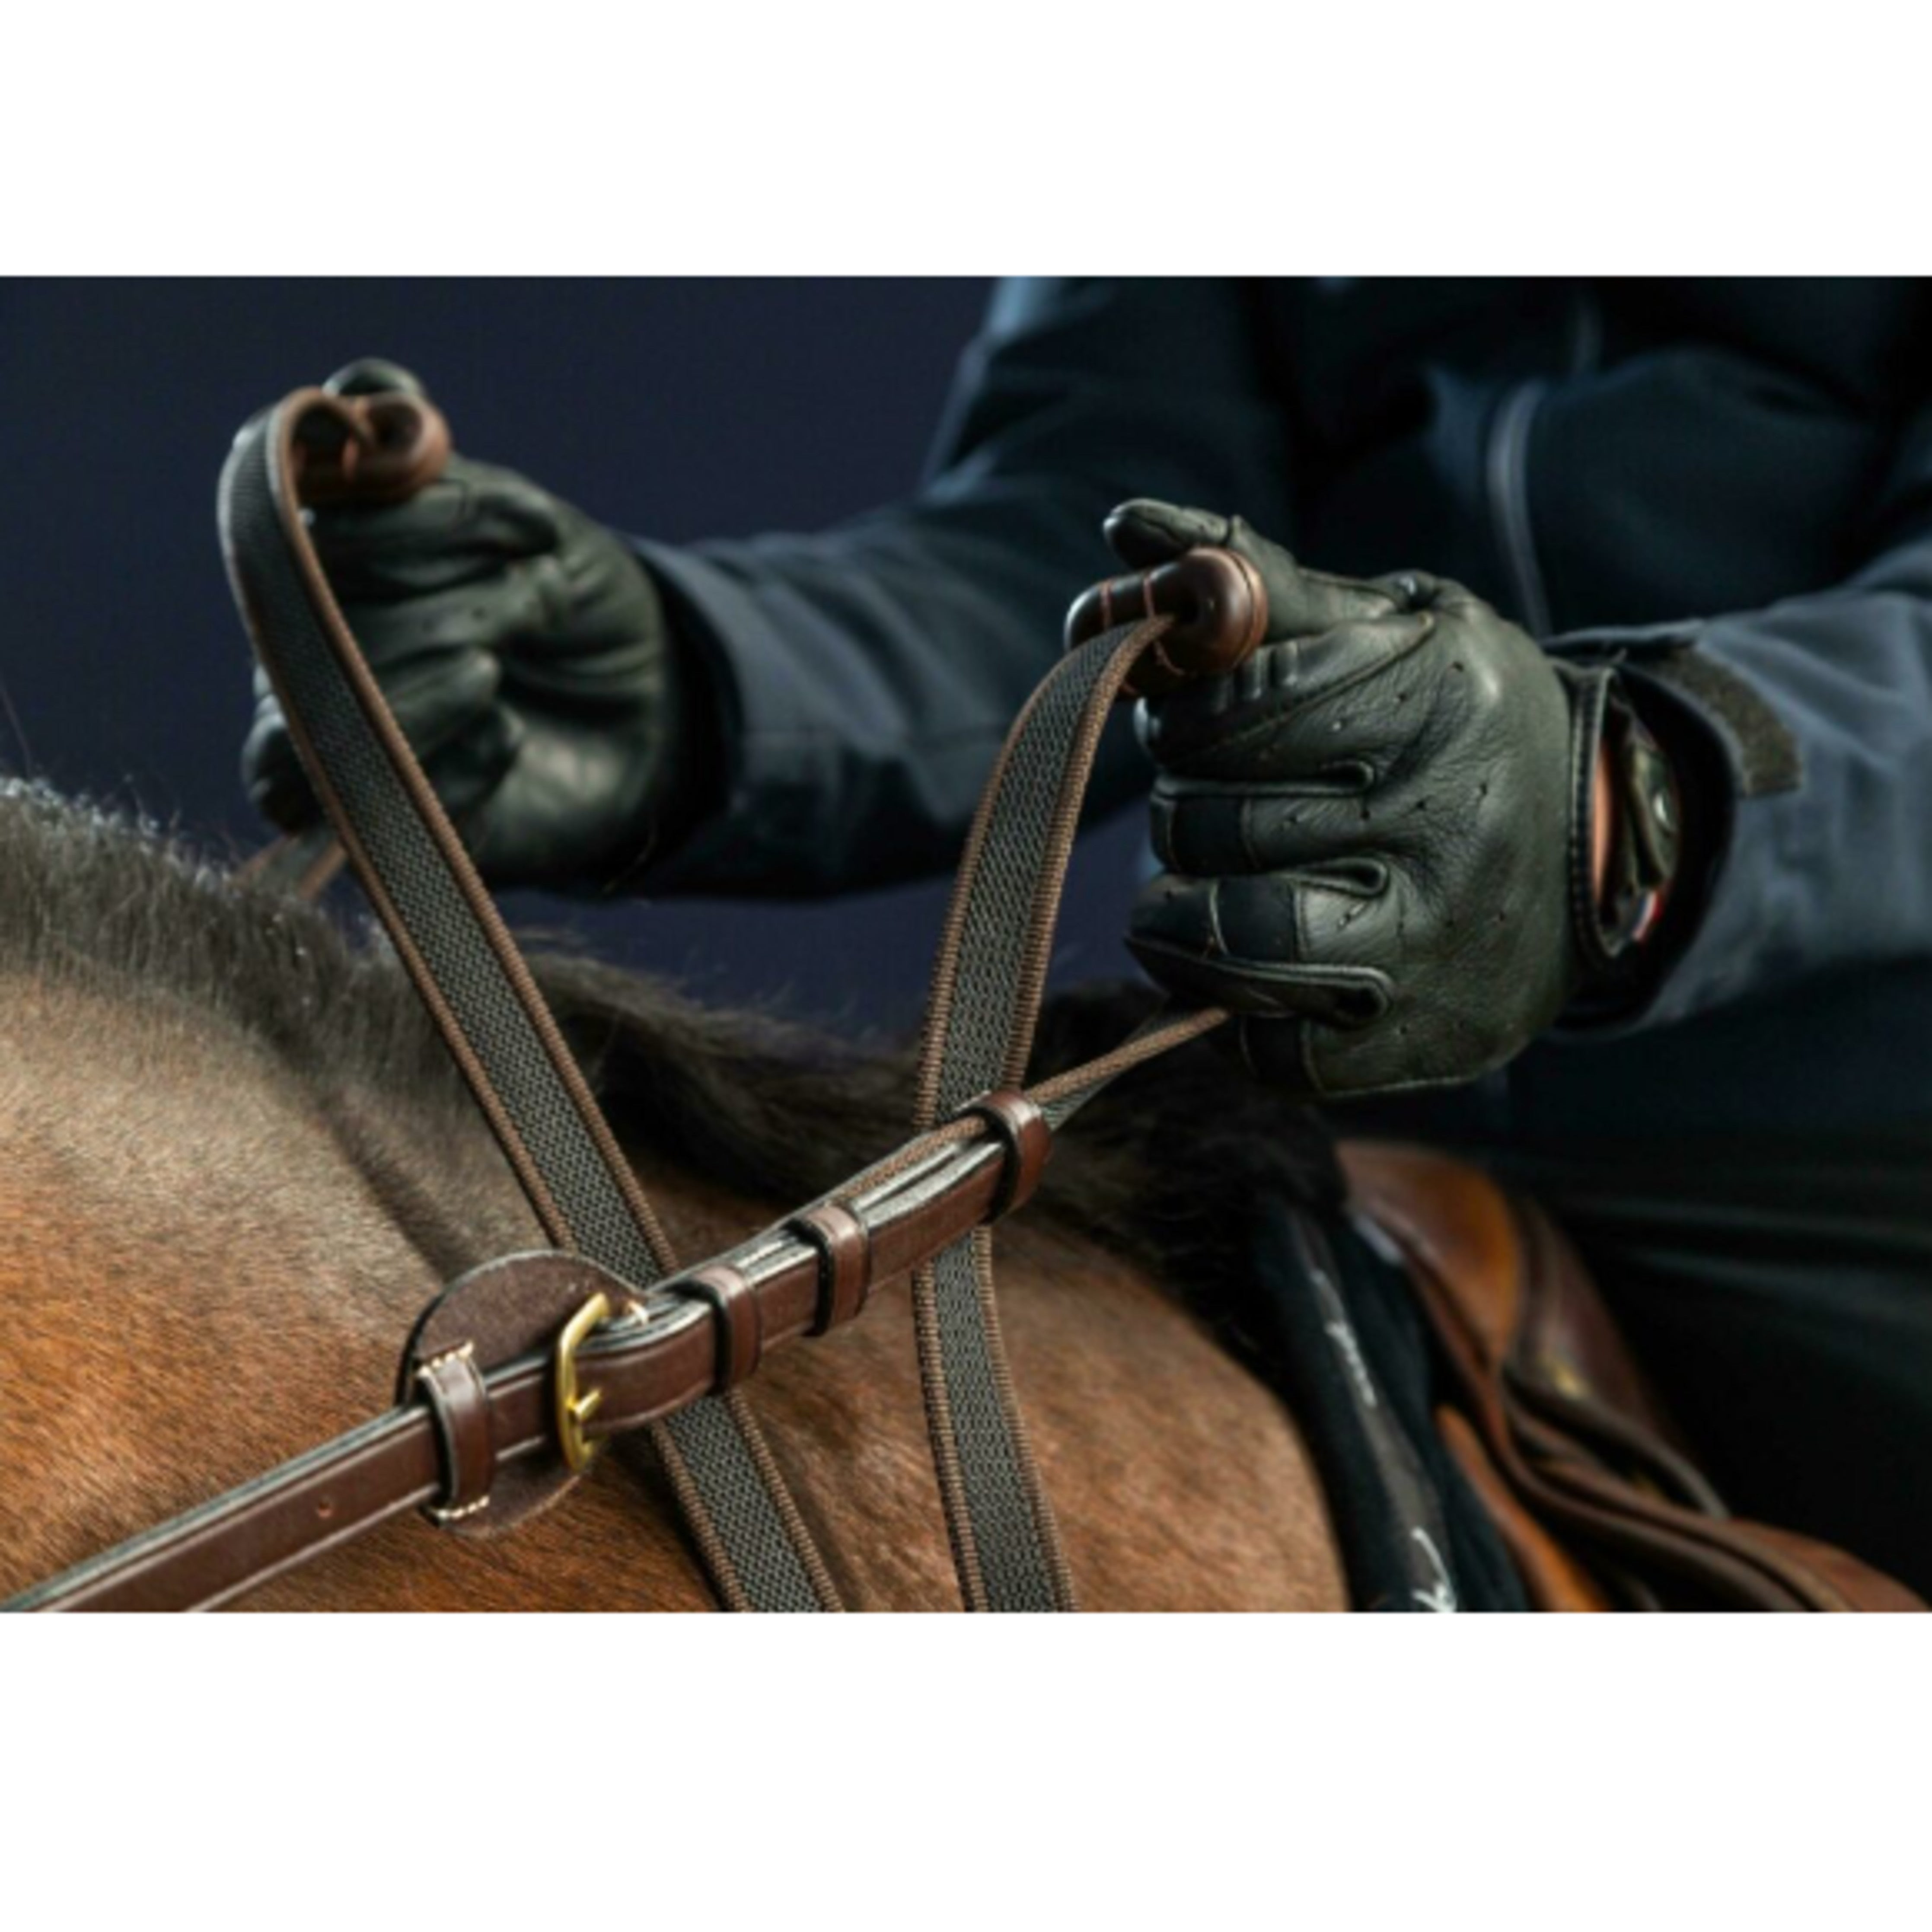 Horze Soft Grip Rubber Reins with Stoppers